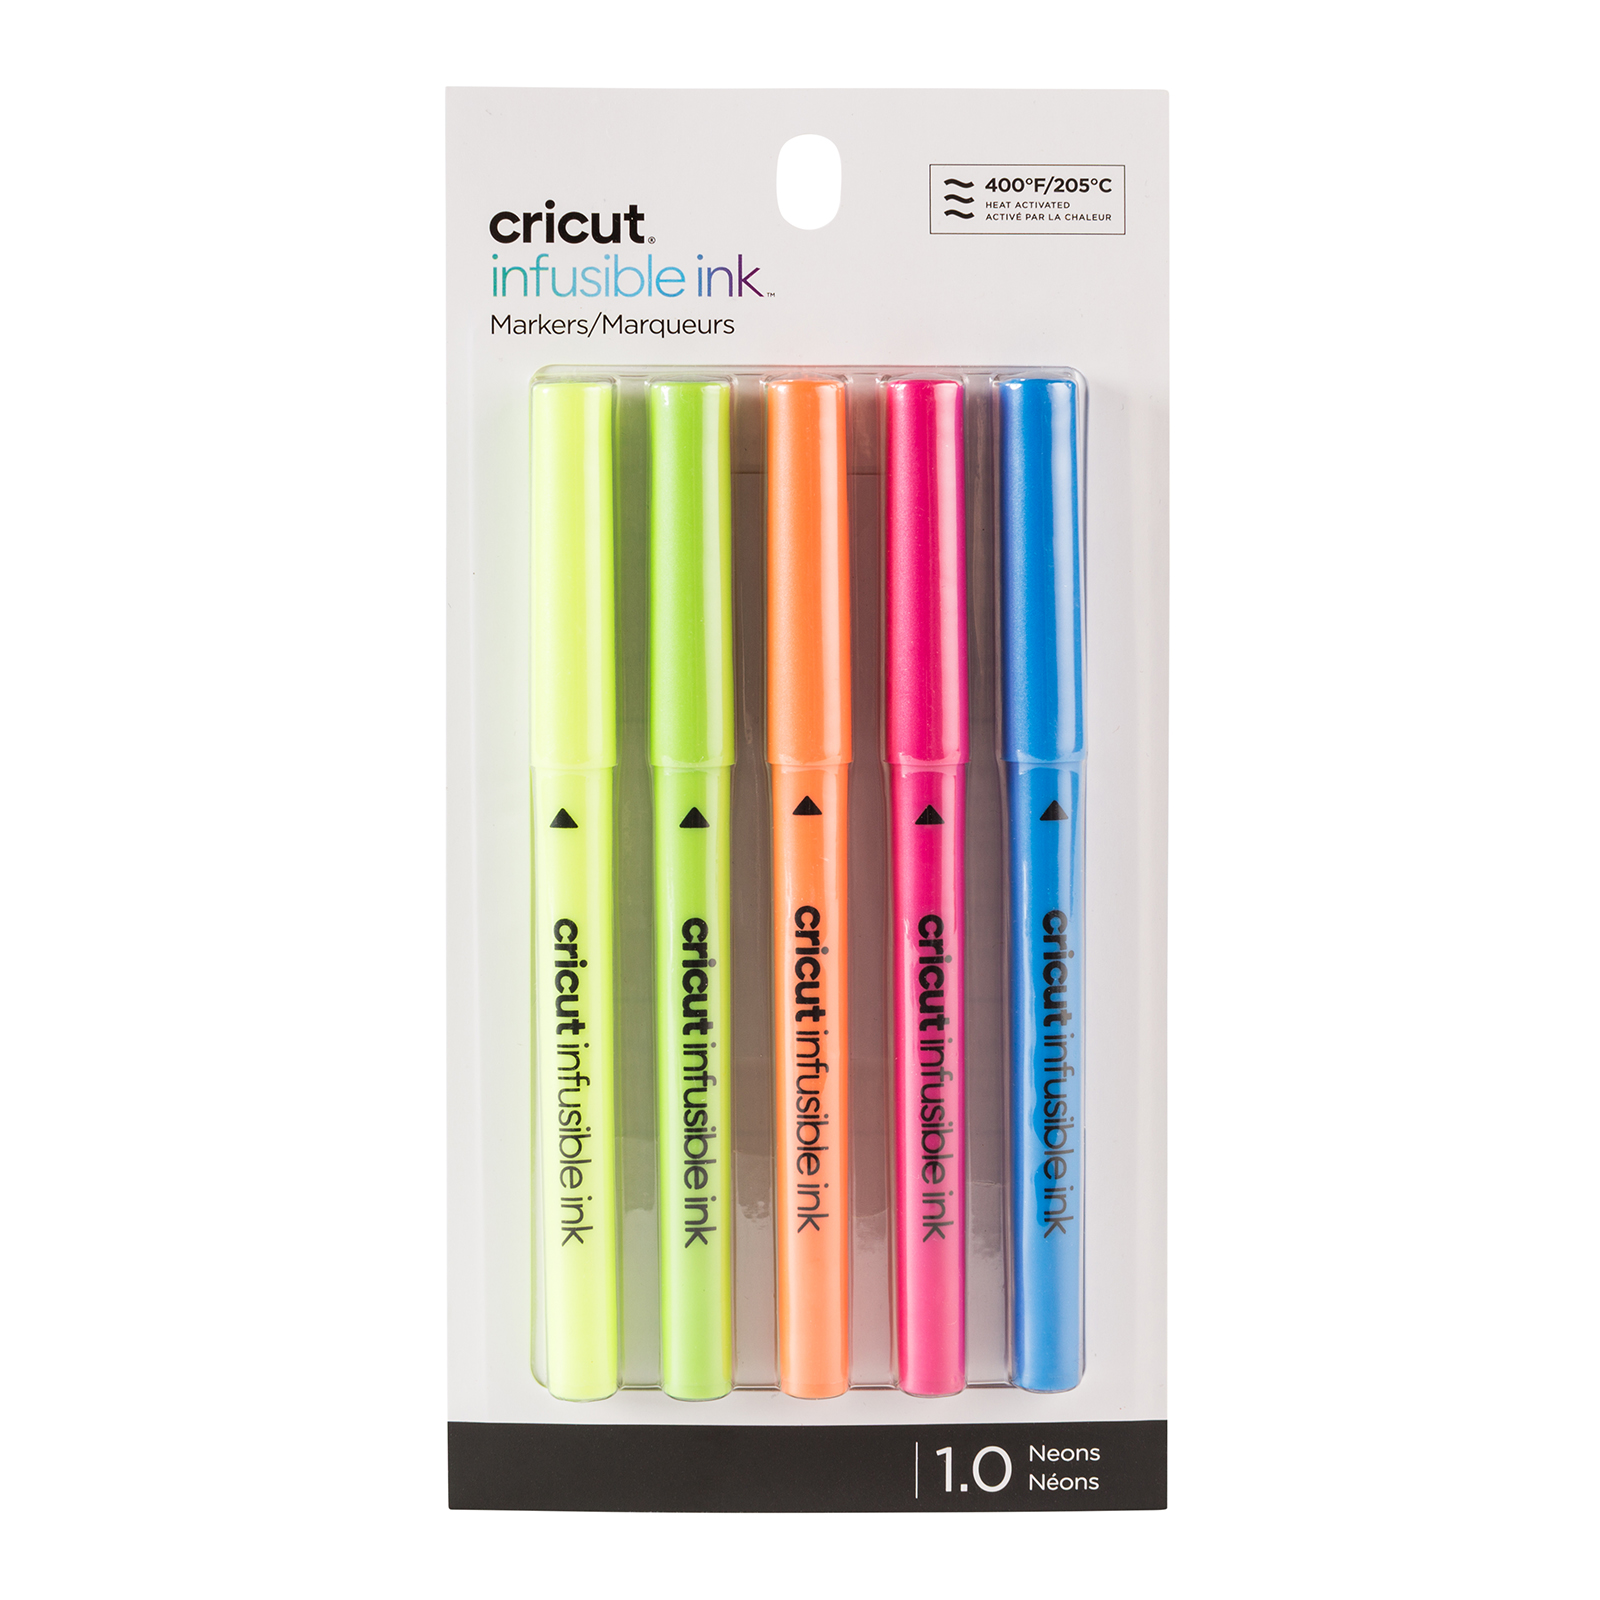 Cricut • Infusible Ink Marker (1.0) Neon